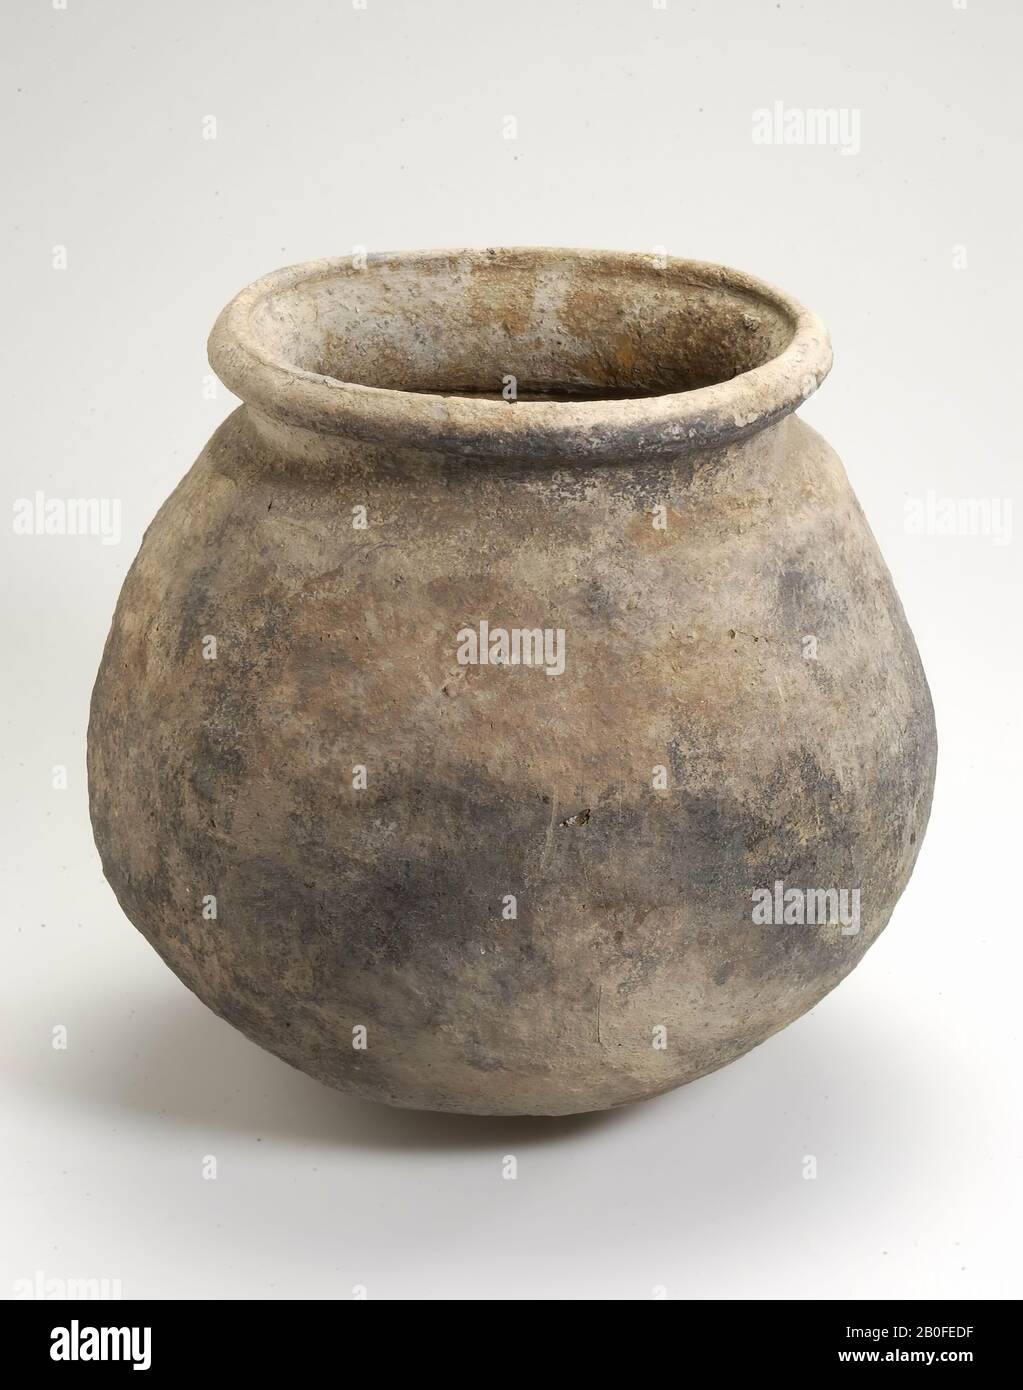 Saxon ball pot of gray earthenware. Orange discoloration on the belly and rim. The surface is slightly damaged, loose remains on the inside of the pot, pot, ball pot, earthenware (hand shaped), h: 22.8 cm, diam: 24.2 cm, vme 450-1050 AD, Netherlands, Friesland, Ferwerderadiel, Ferwerd Stock Photo